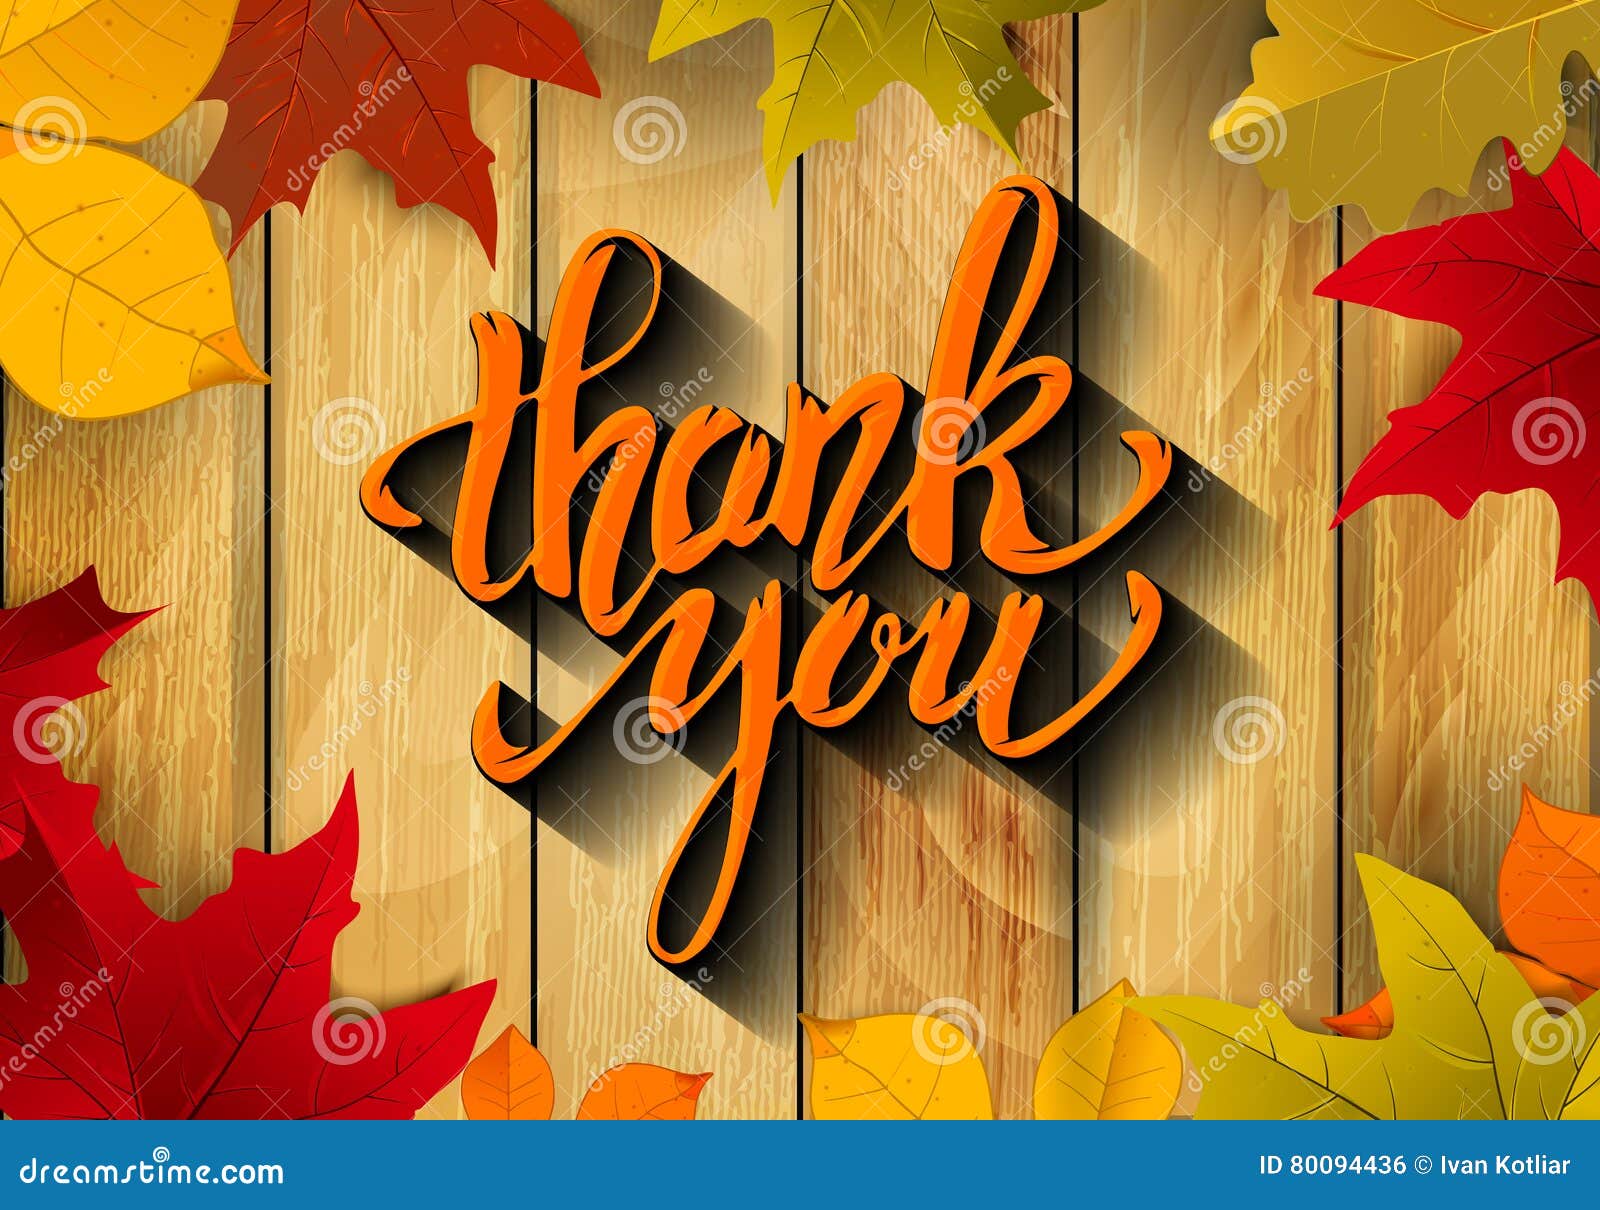 Thank You. Hand Drawn Lettering with Yellow Autumn Leaves Stock ...